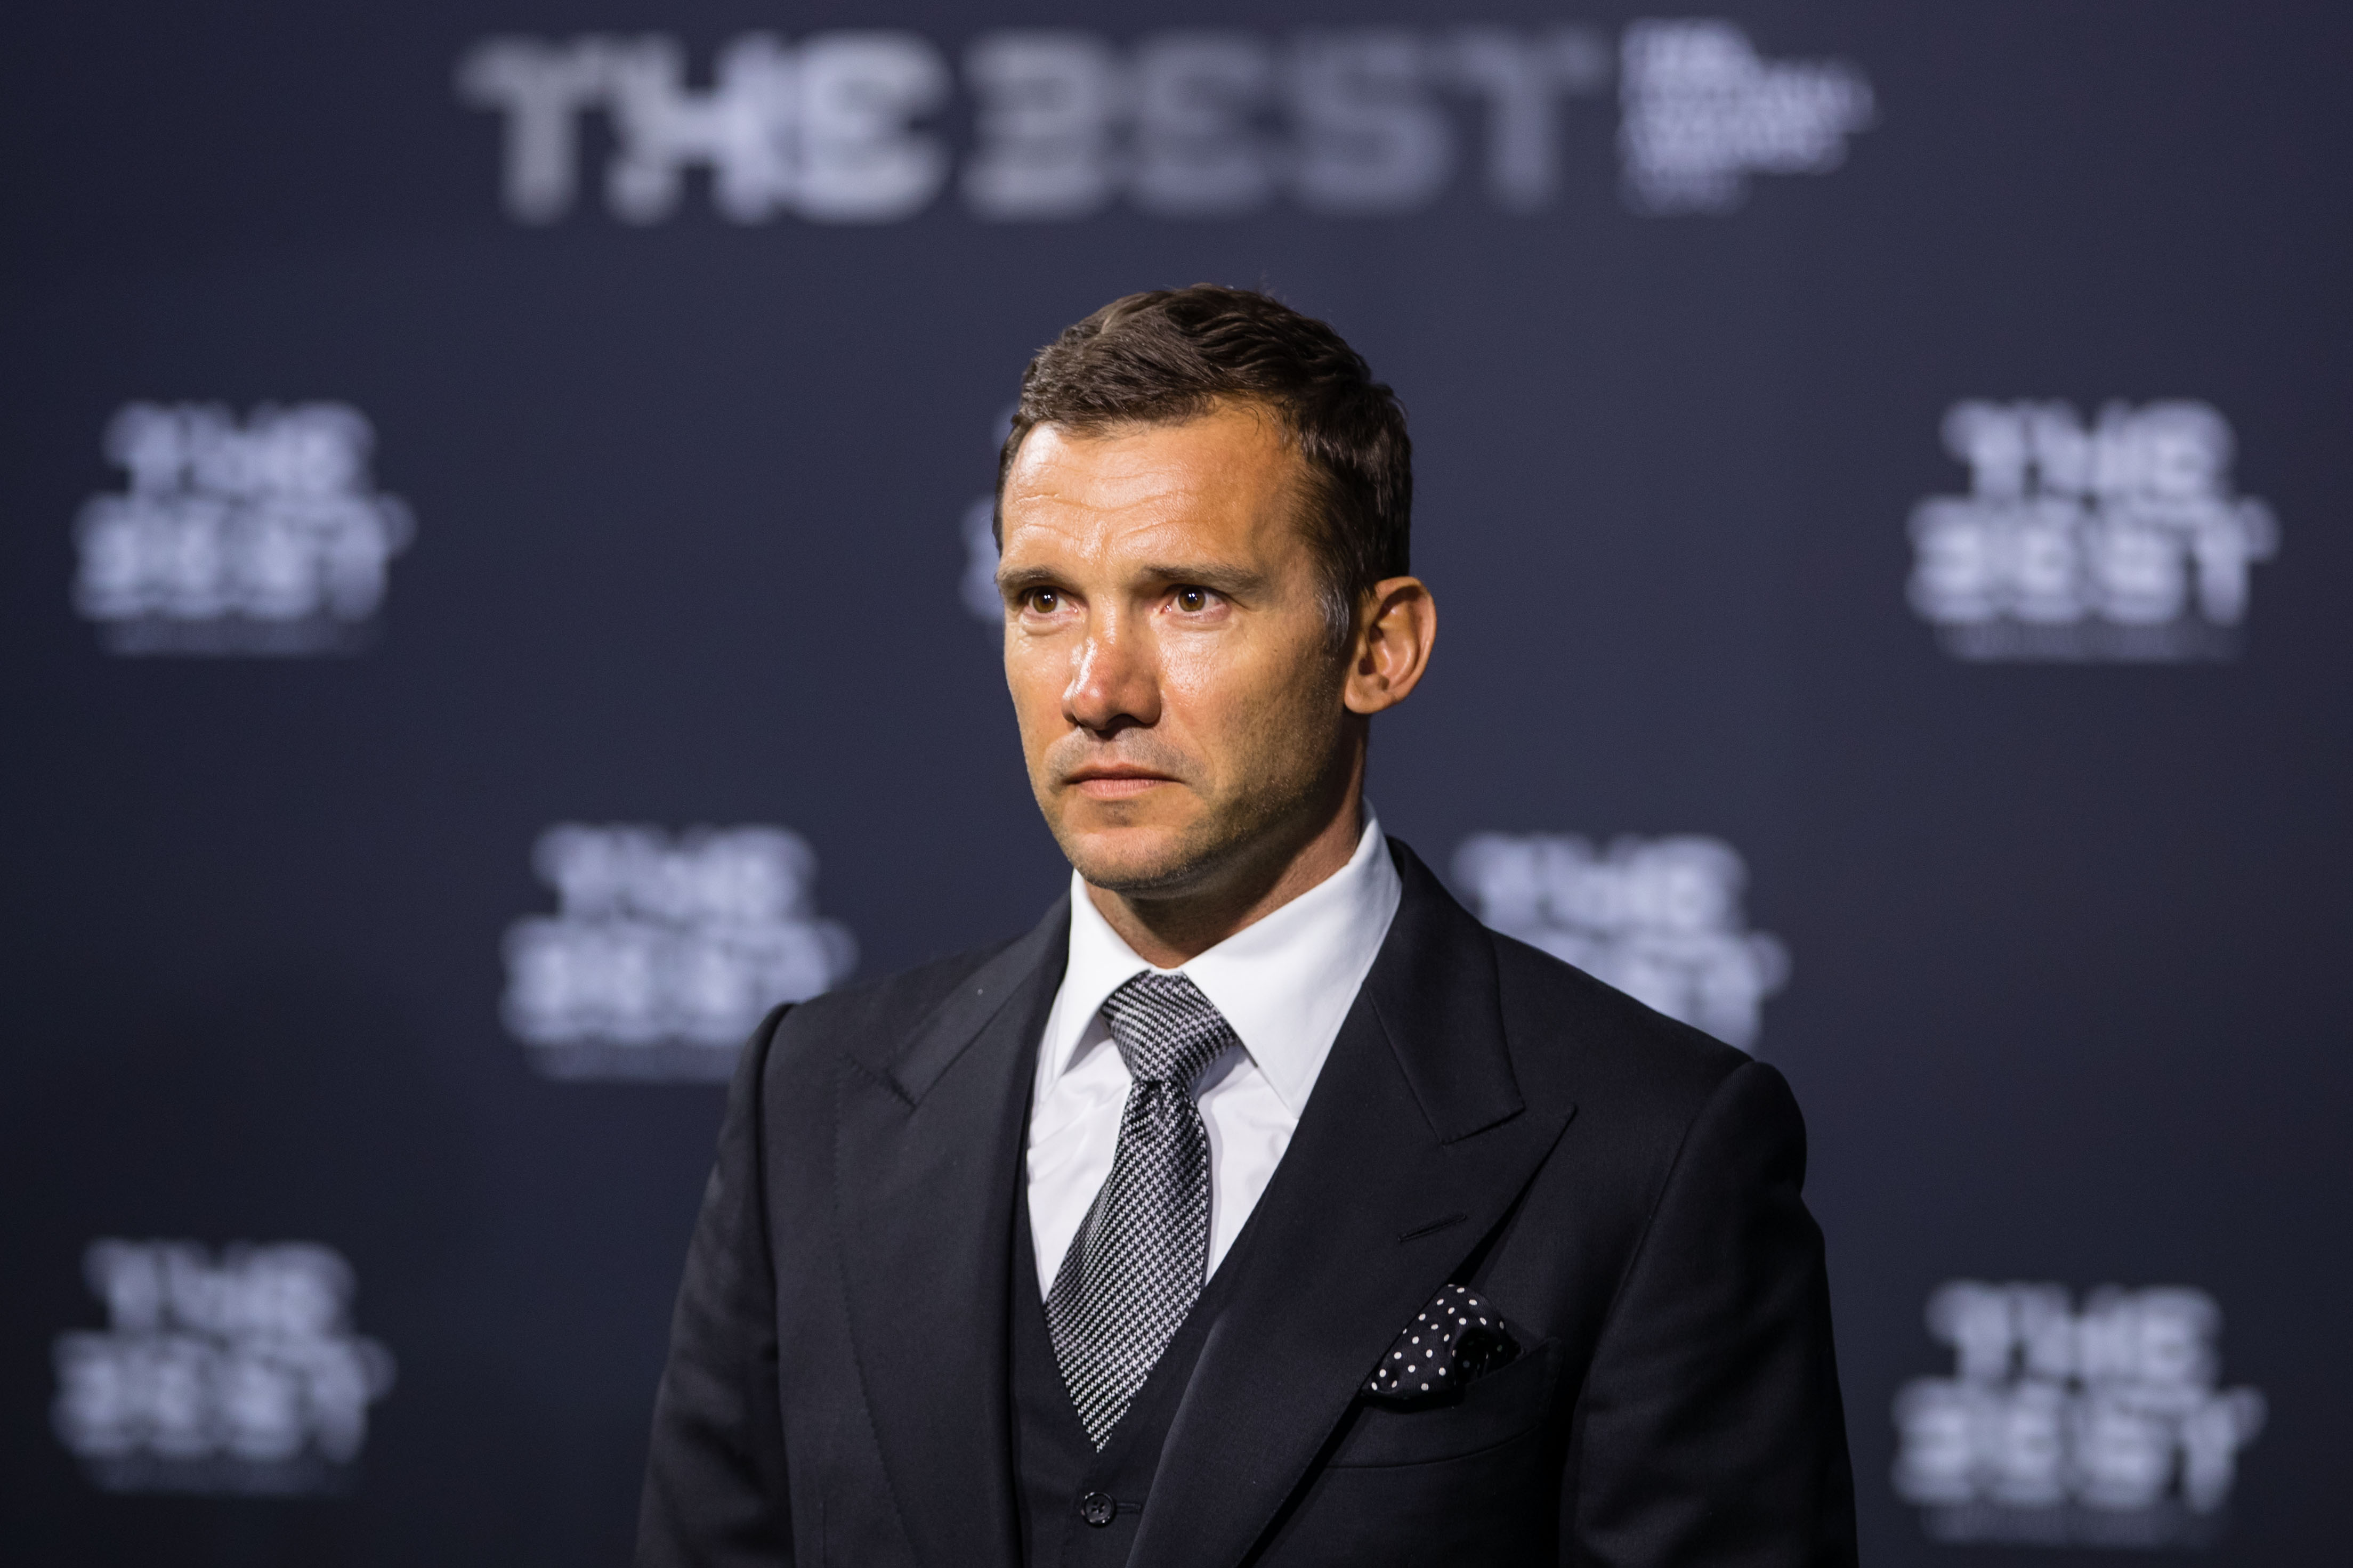 Shevchenko: “Milan & Inter Can Fight To The End To Obtain Their Goals”